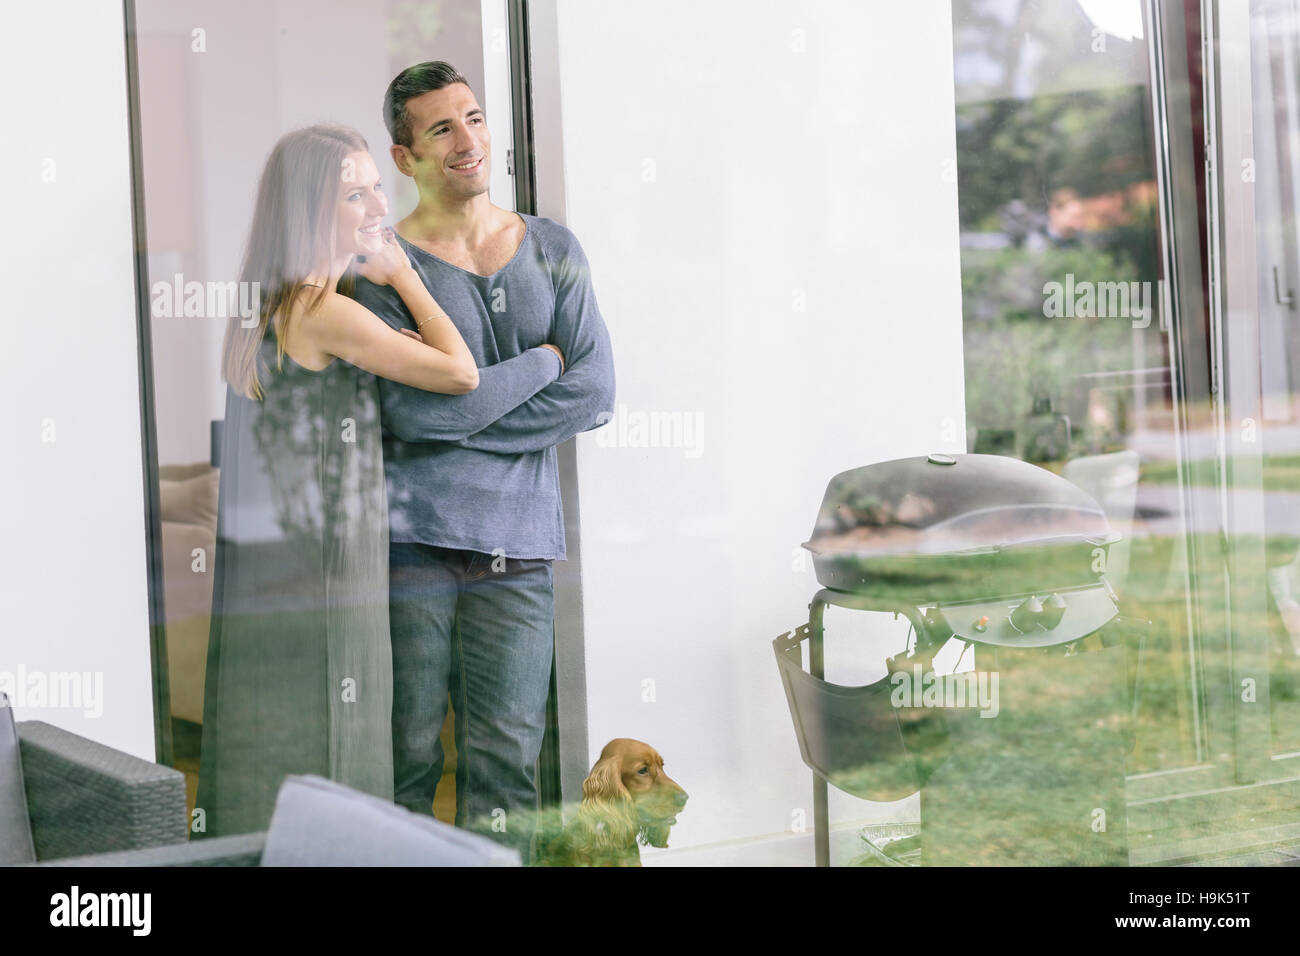 Smiling couple with dog standing at terrace door Stock Photo